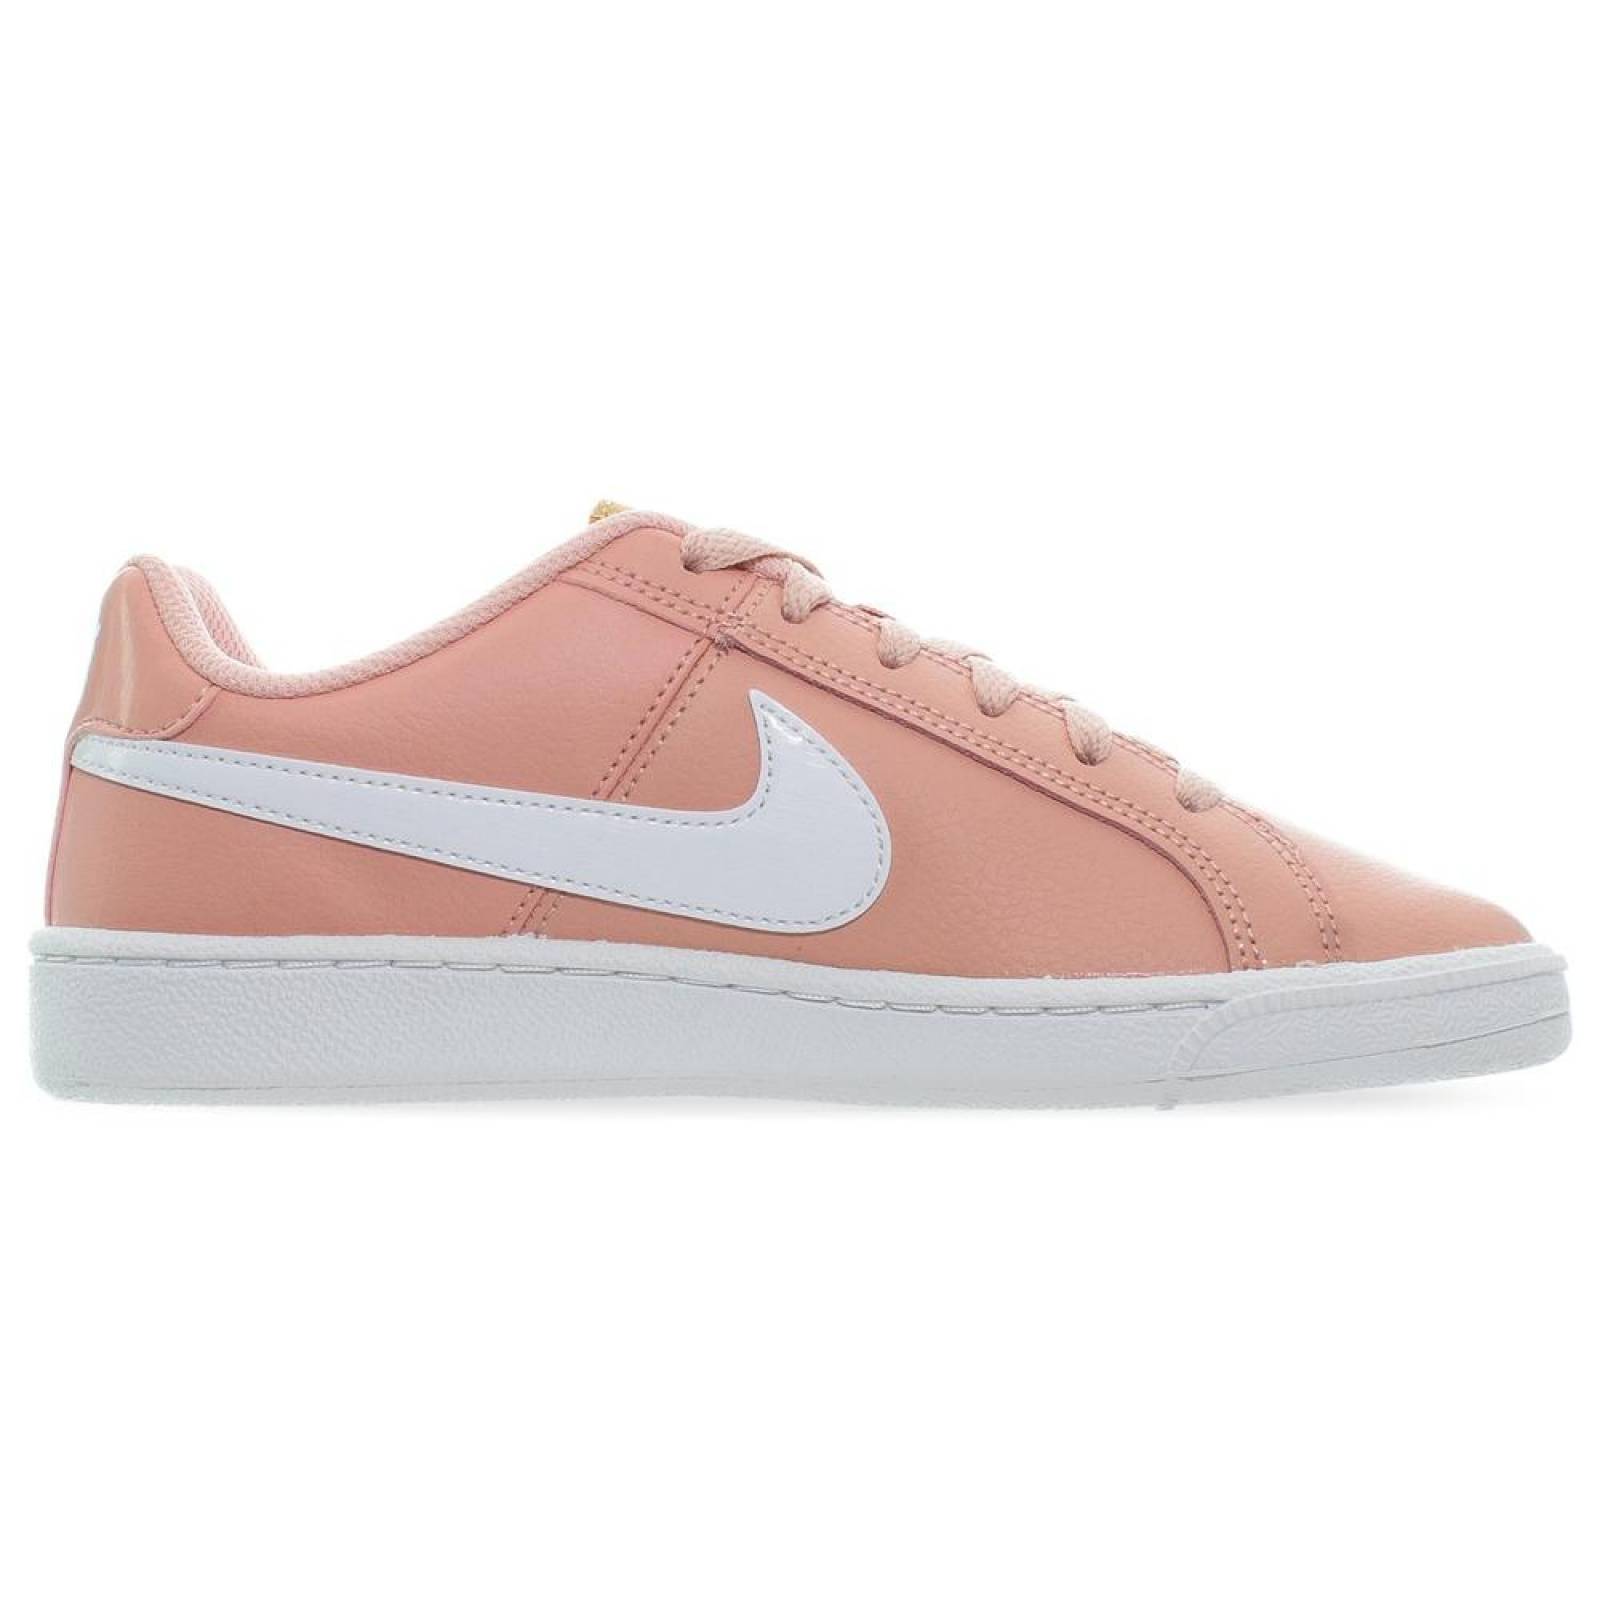 Tenis Nike Court Royale - 749867602 - Rosa - Mujer 